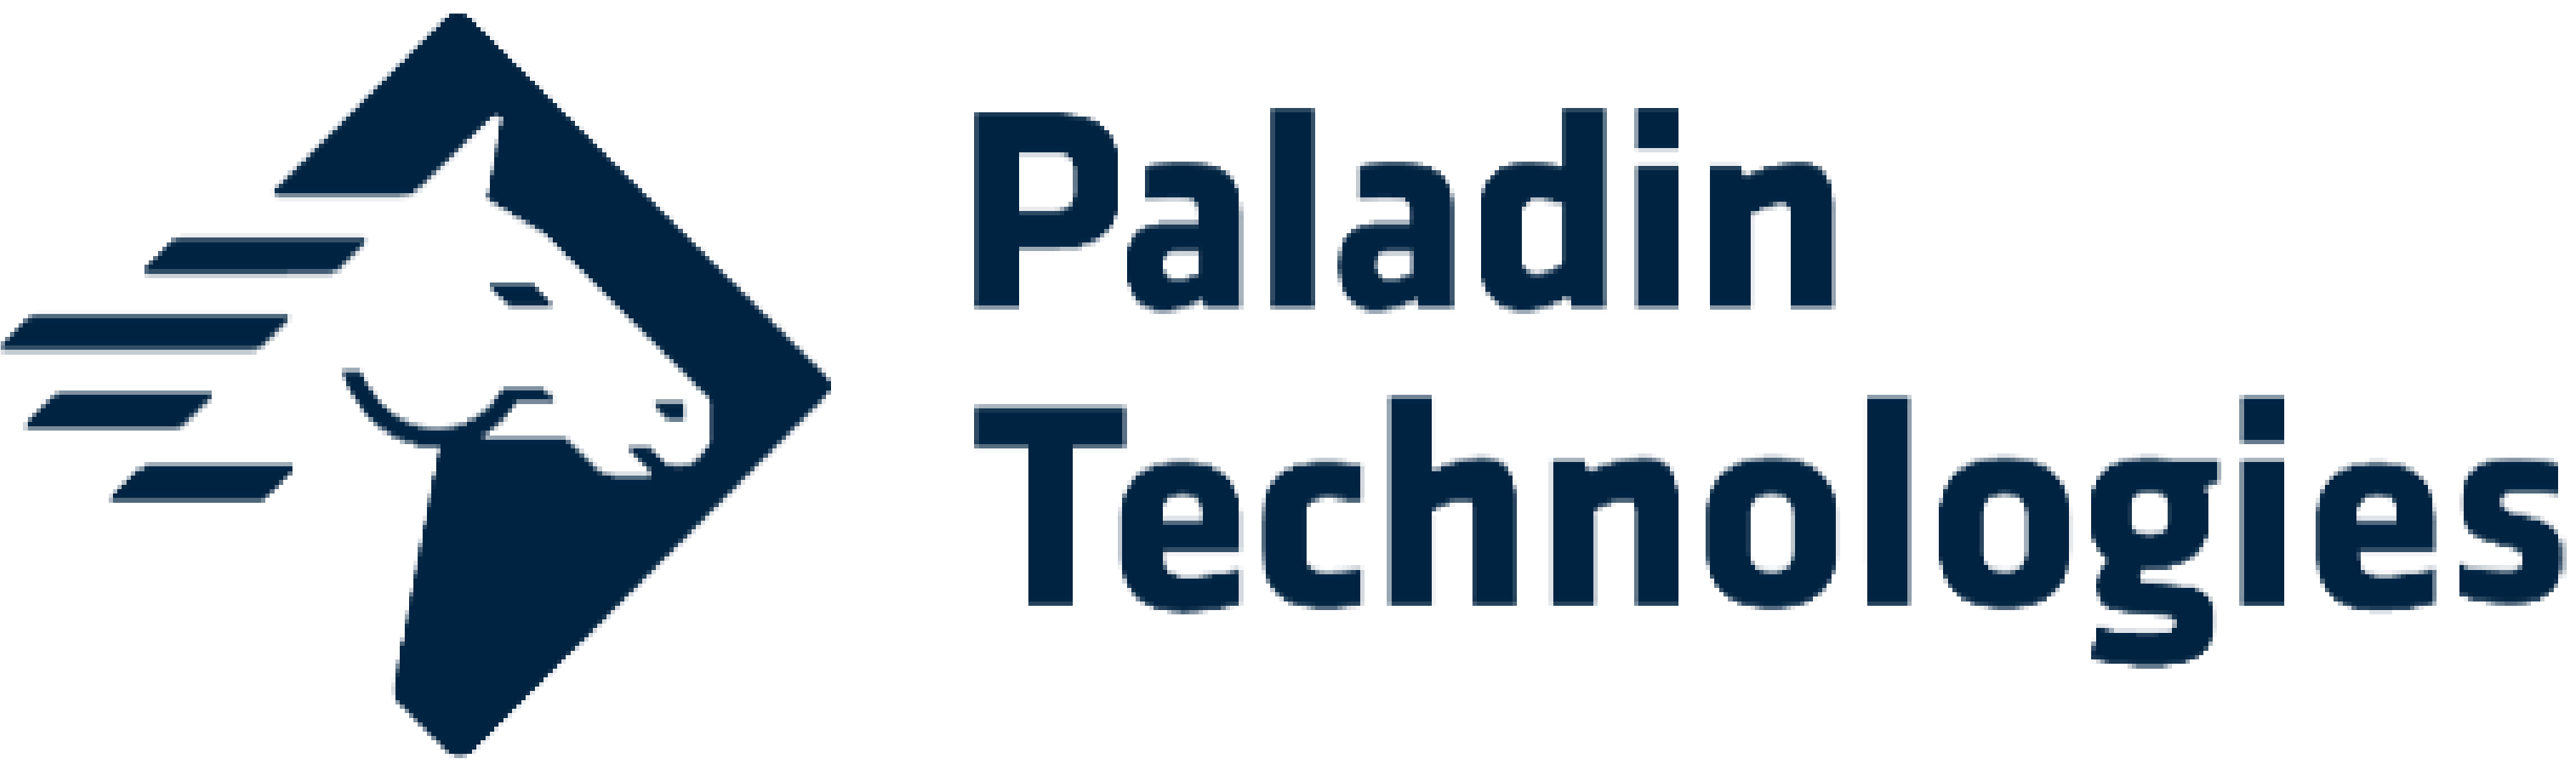 https://www.paladinsecurity.com/wp-content/uploads/2021/05/PTI-2.png